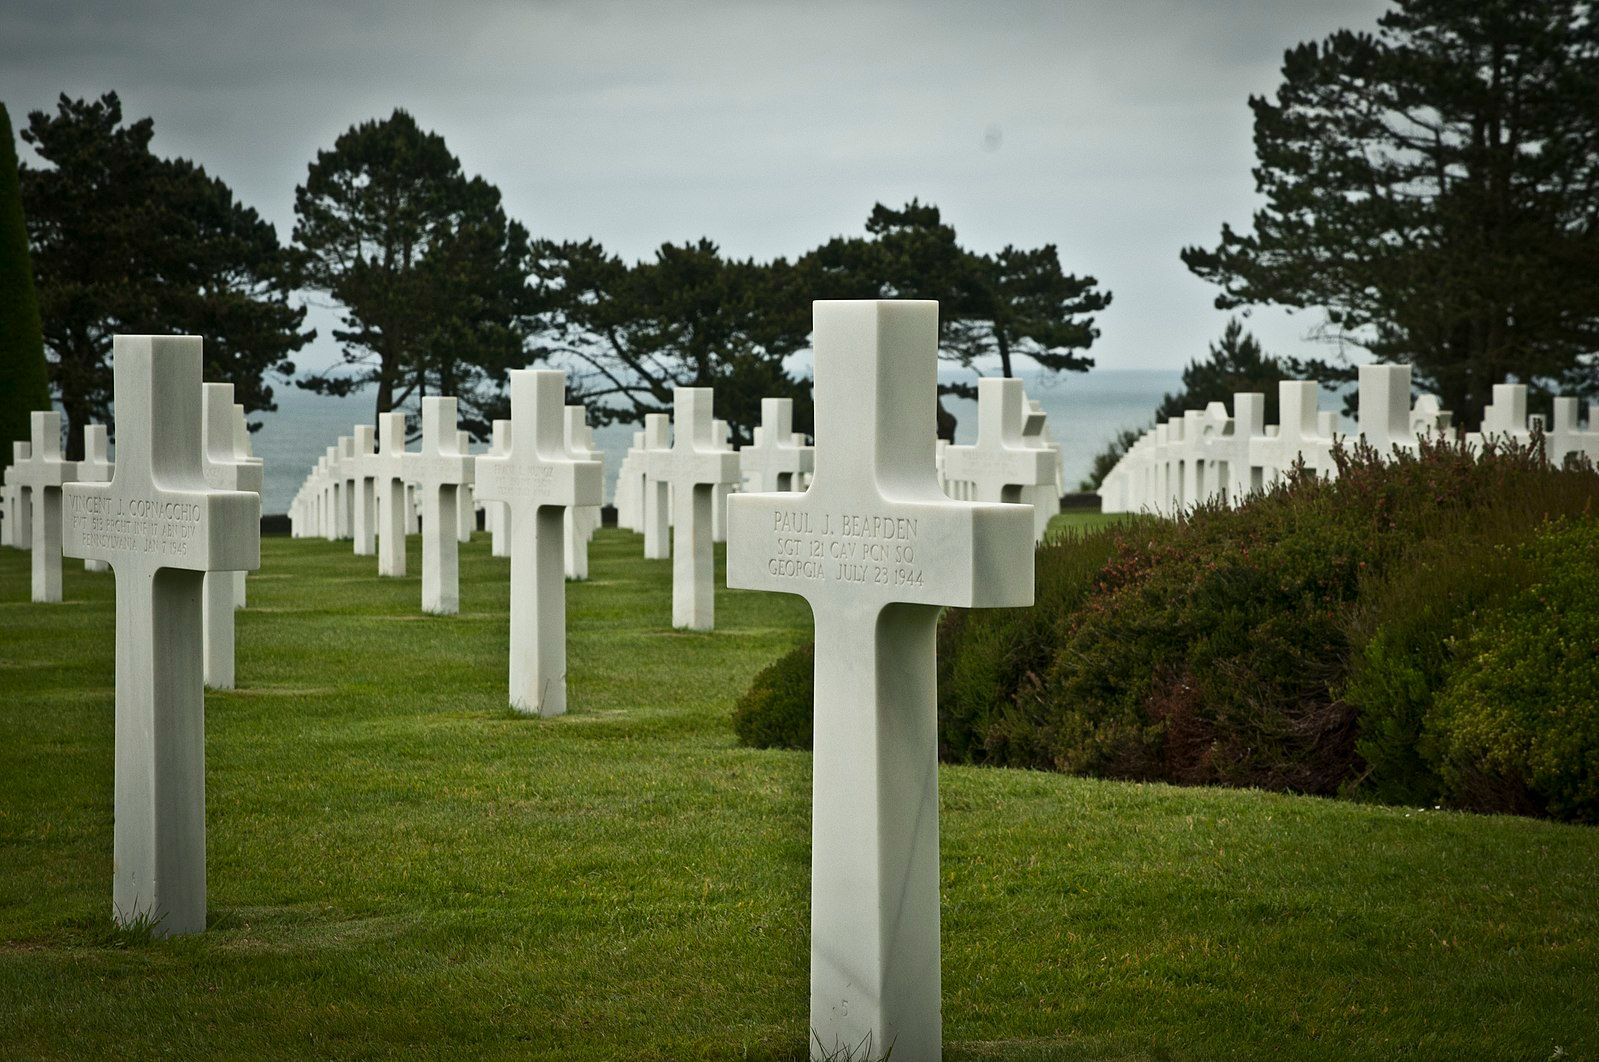 1599px-Joint_Task_Force_D-Day_71_visits_D-Day_sites_150602-A-DI144-583.jpg